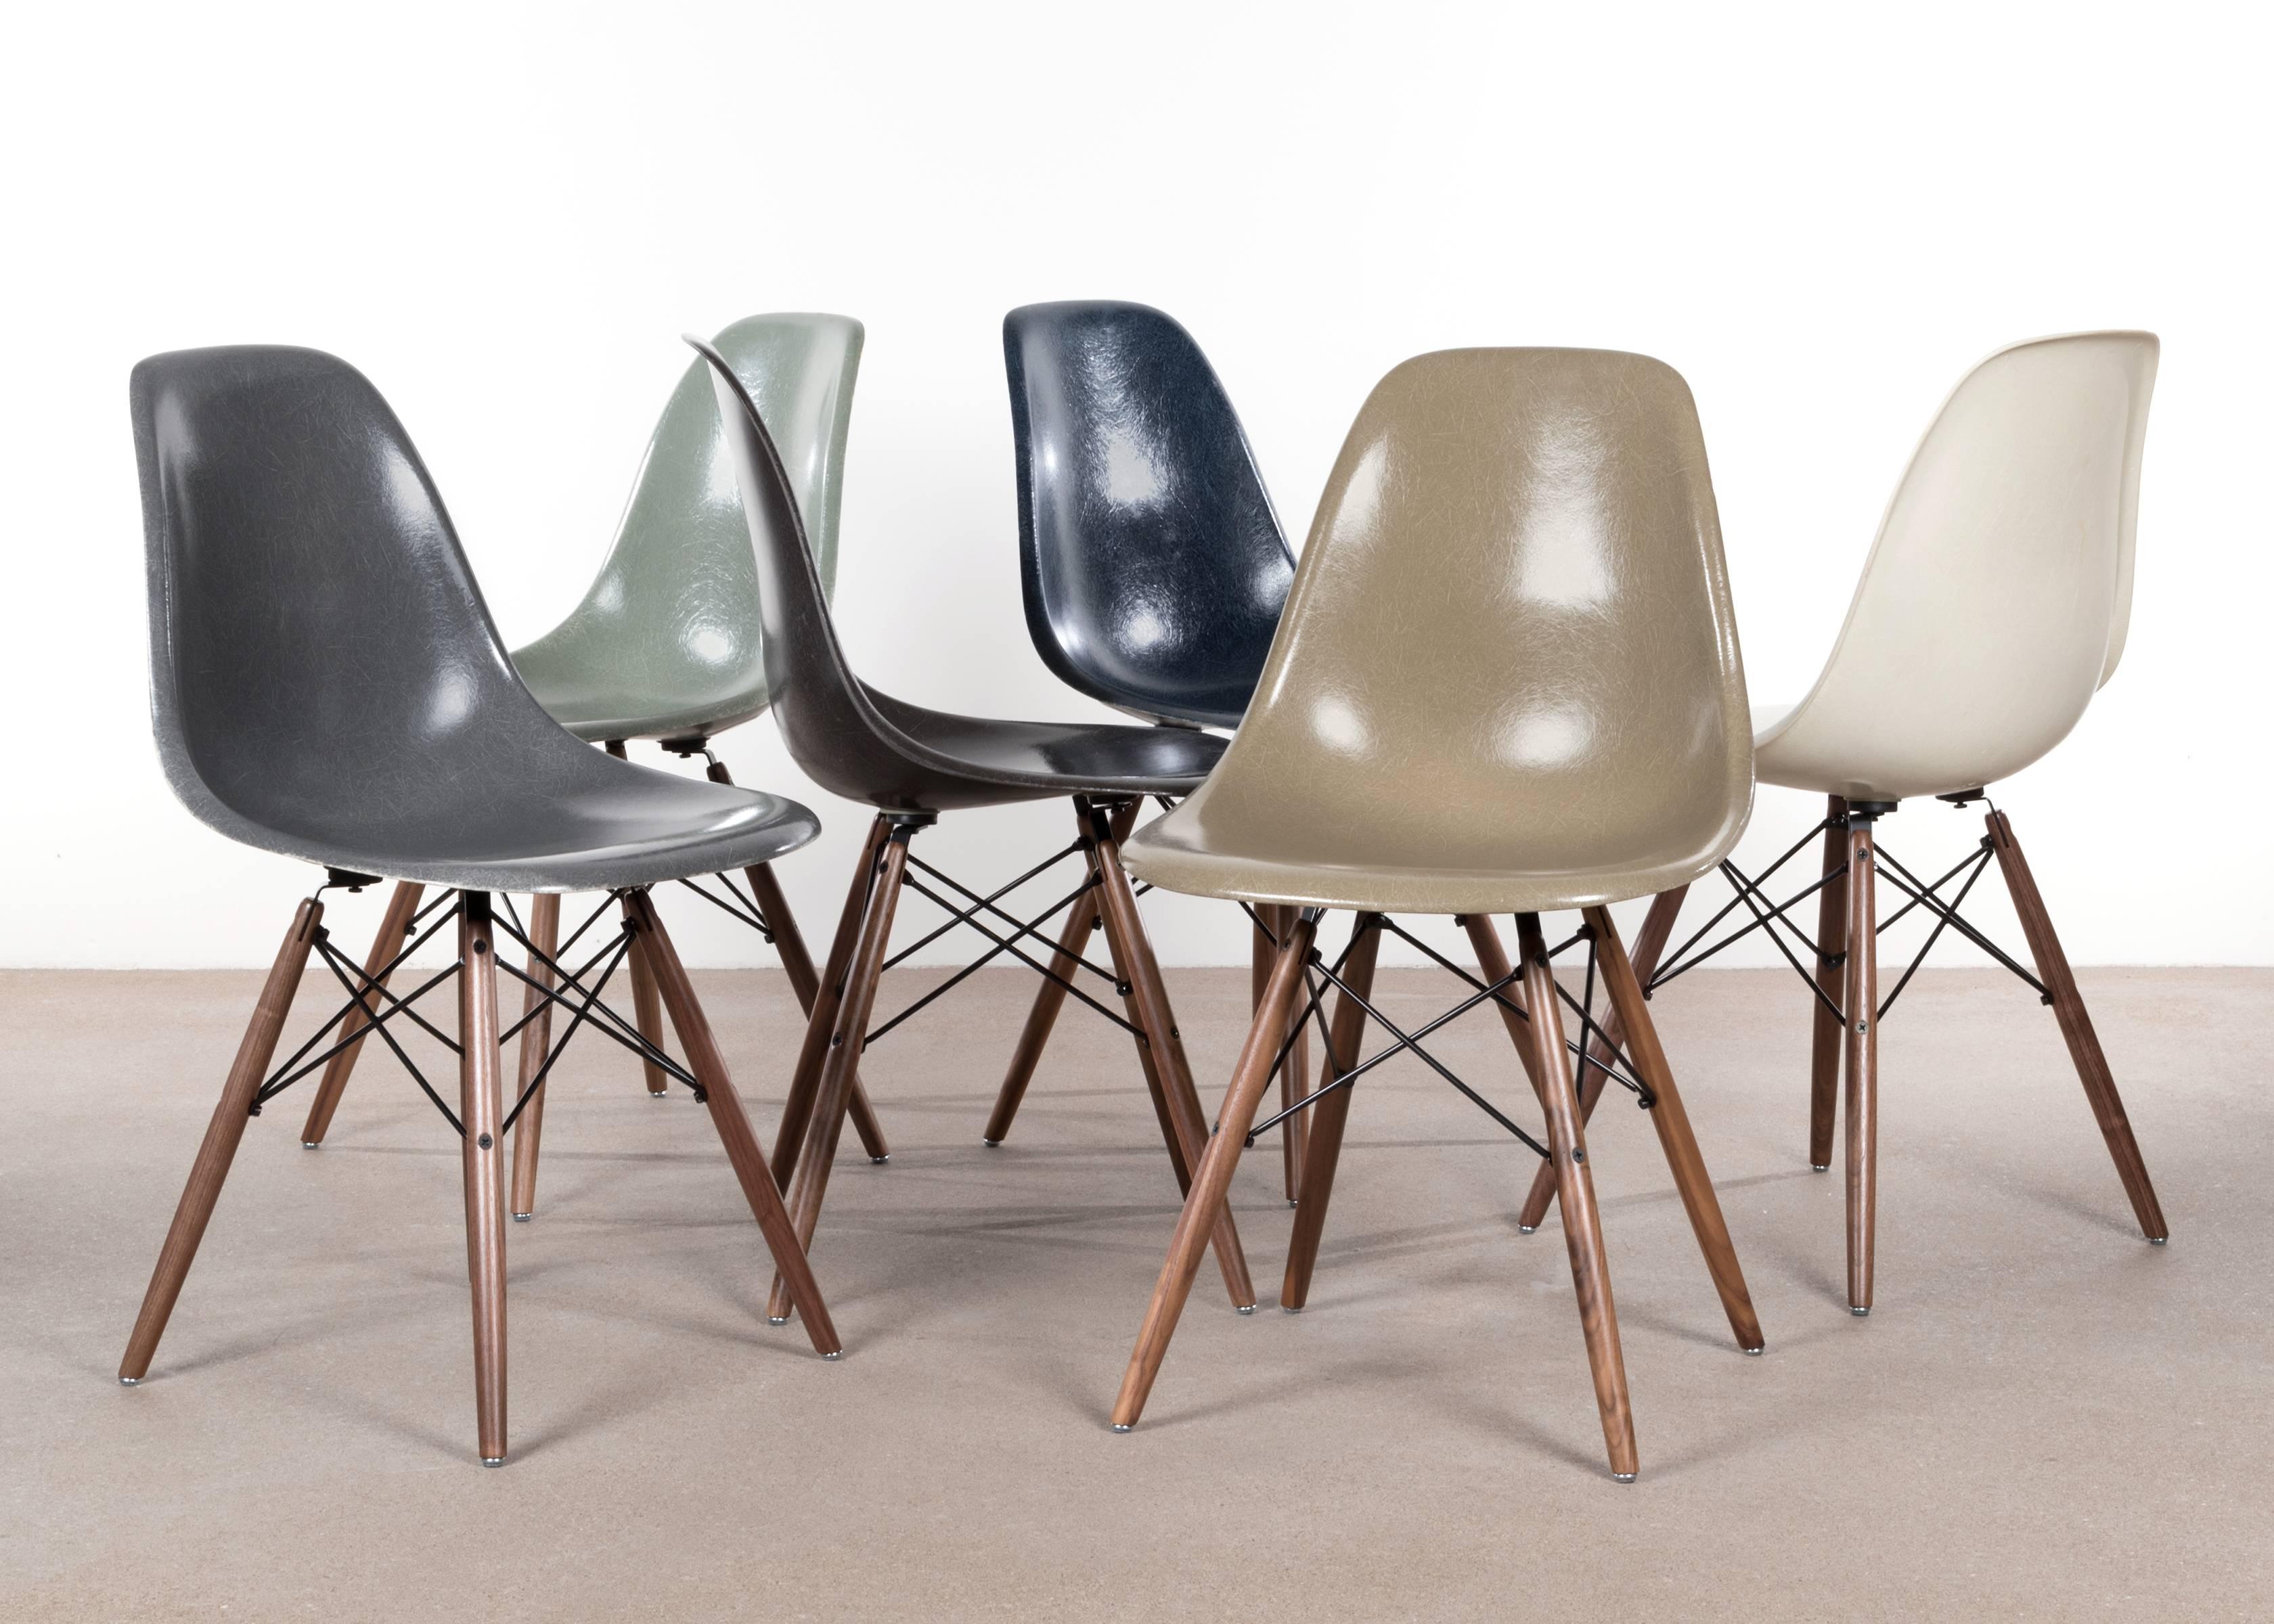 Beautiful iconic DSW chairs in natural colors: Parchment, raw umber, charcoal, elephant hide grey, sea foam green, navy blue.
Shells are in very good or excellent condition with only slight traces of use. Replaced shock mounts which guarantee save